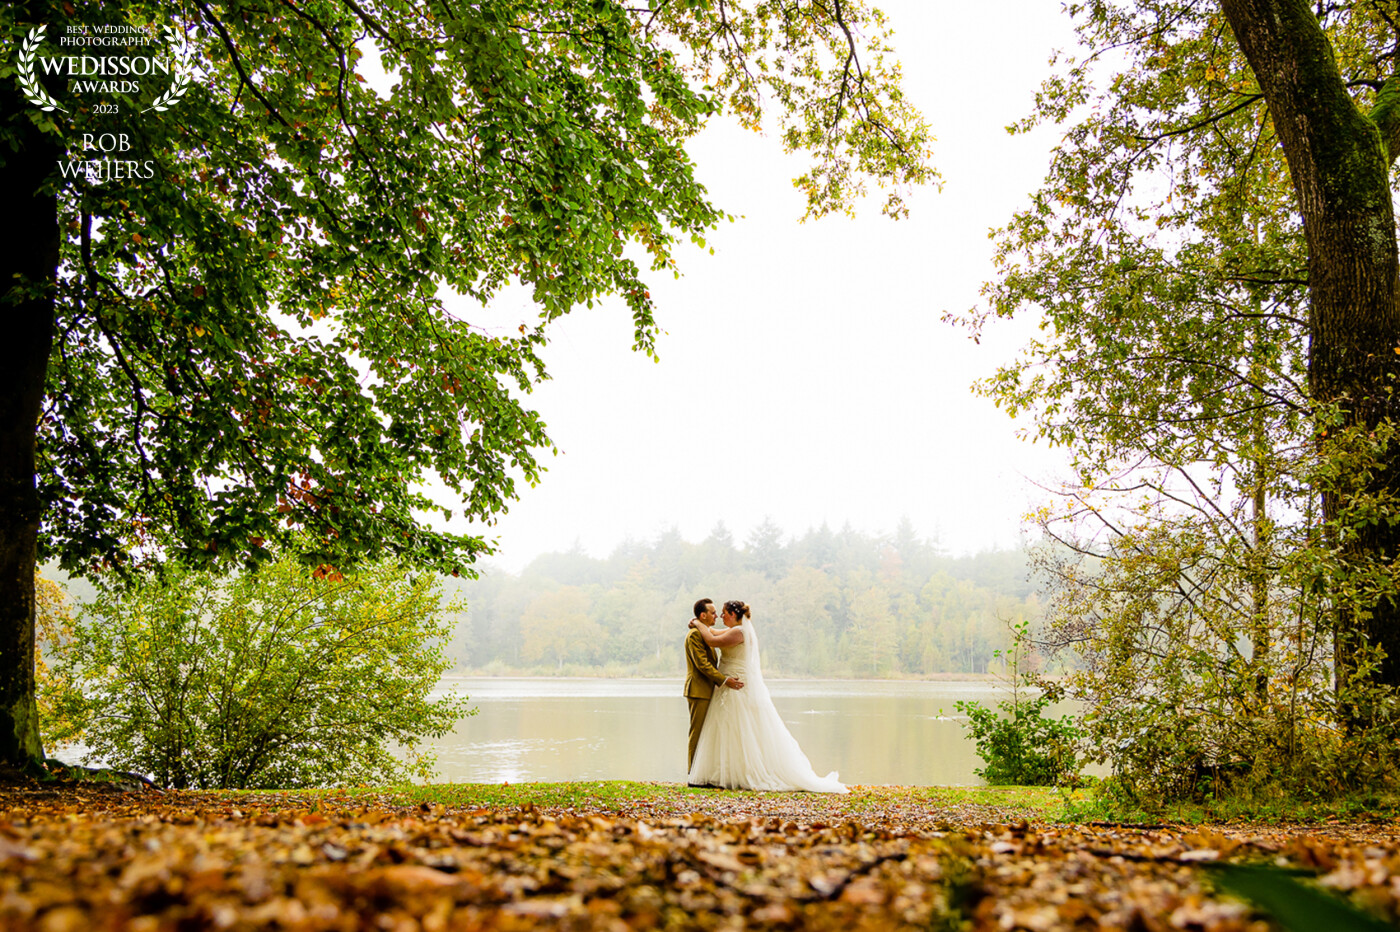 The shooting of this wedding reportage took place between the rain showers. But luckily the bride and groom were tough guys. This photo was one of the last to take. The autumn colors, the bit of fog and the water in the background made for a beautiful setting. Bridal couple in the middle and done!